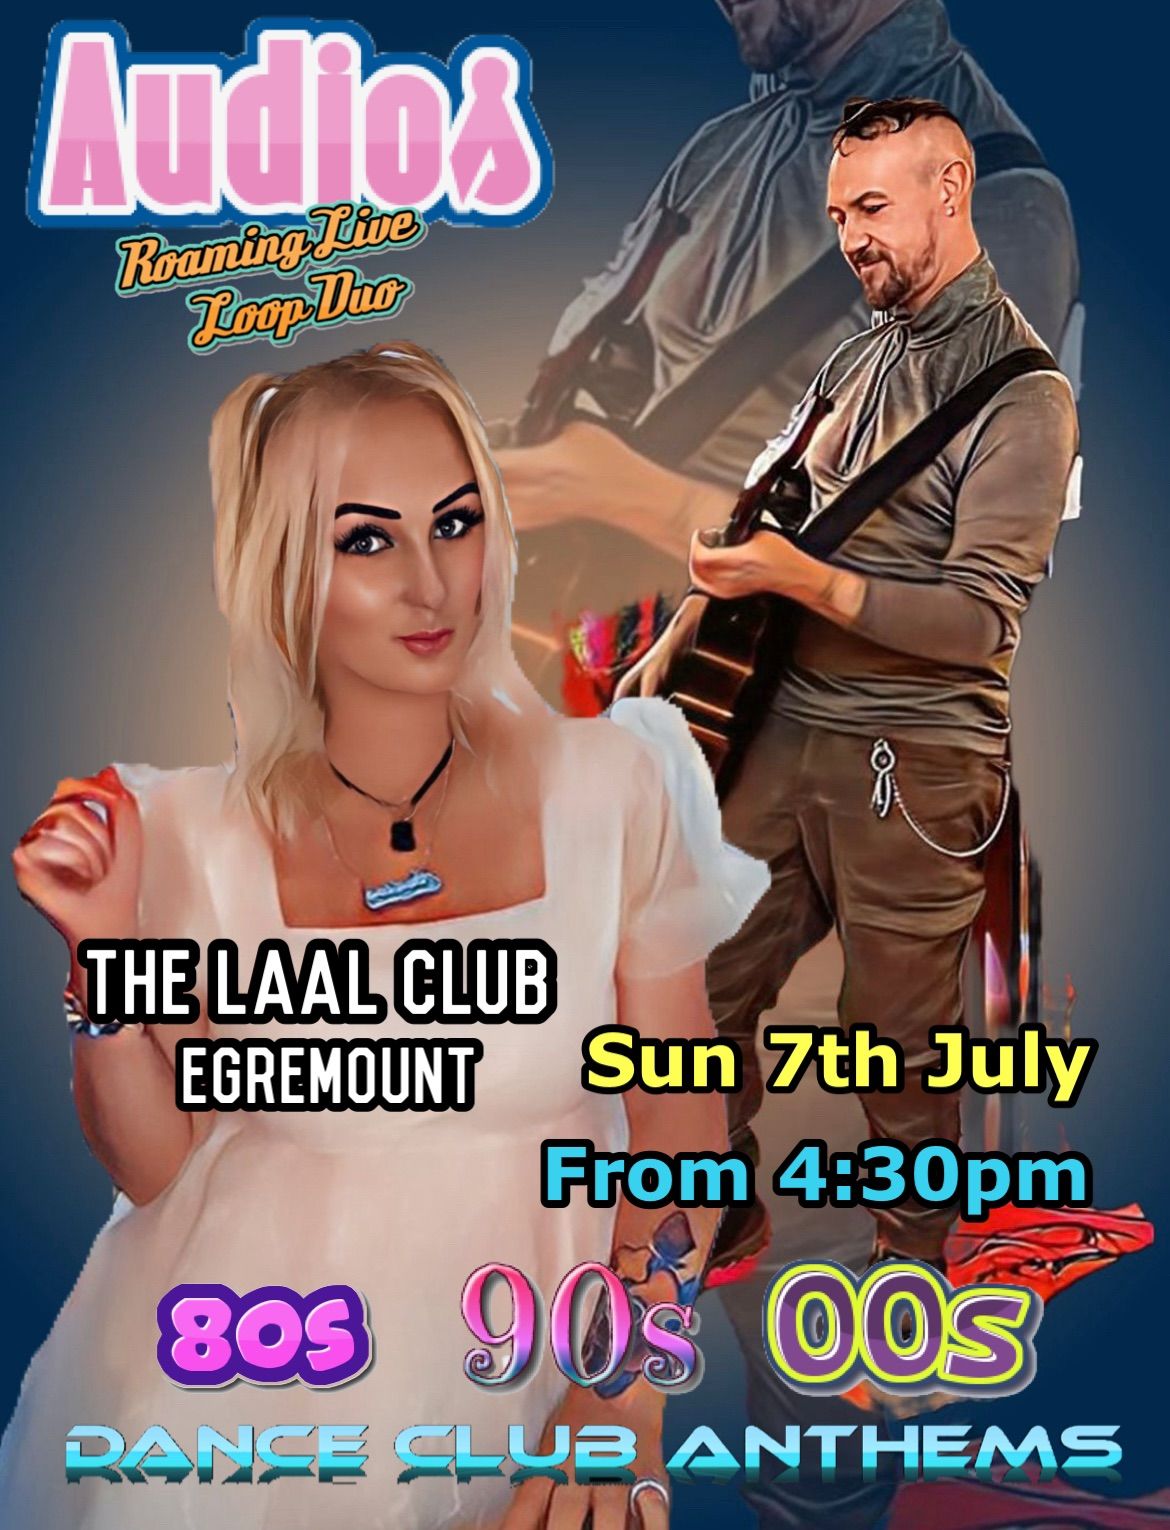 Live at The Laal club in Egremont from 4:30pm